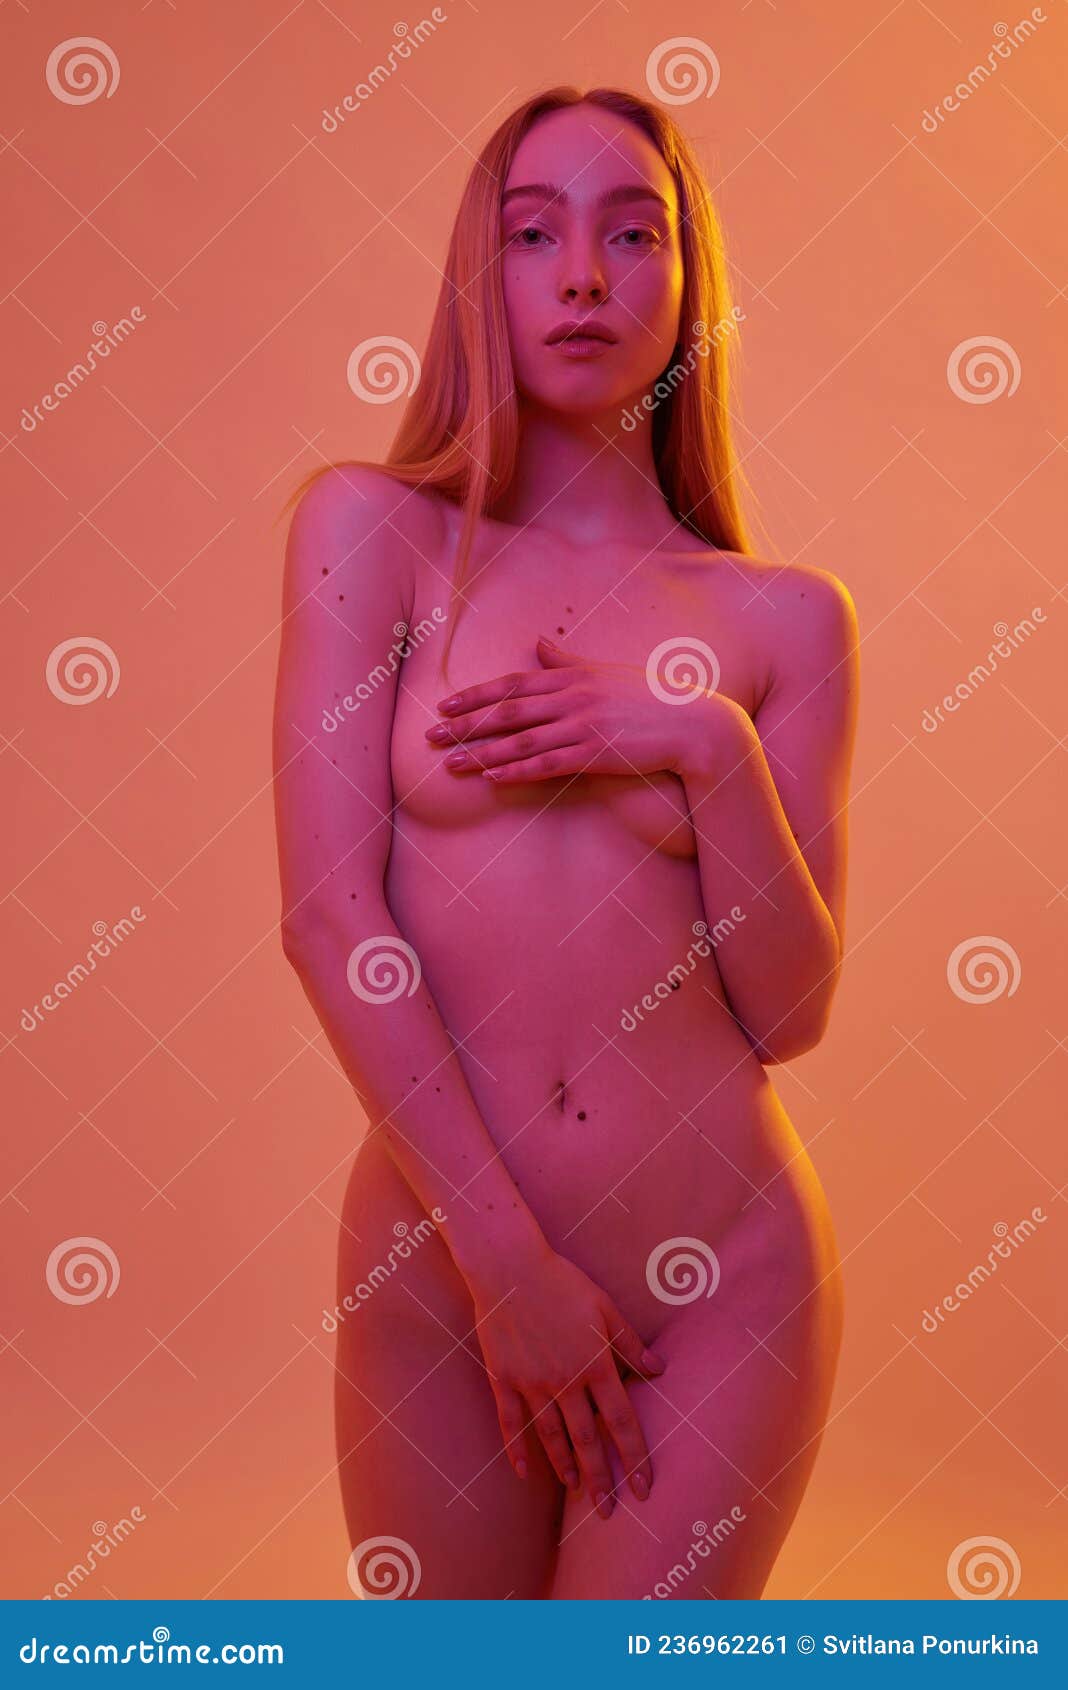 Nude Girl Looking at Camera with Passion Stock Image - Image of person,  erotic: 236962261